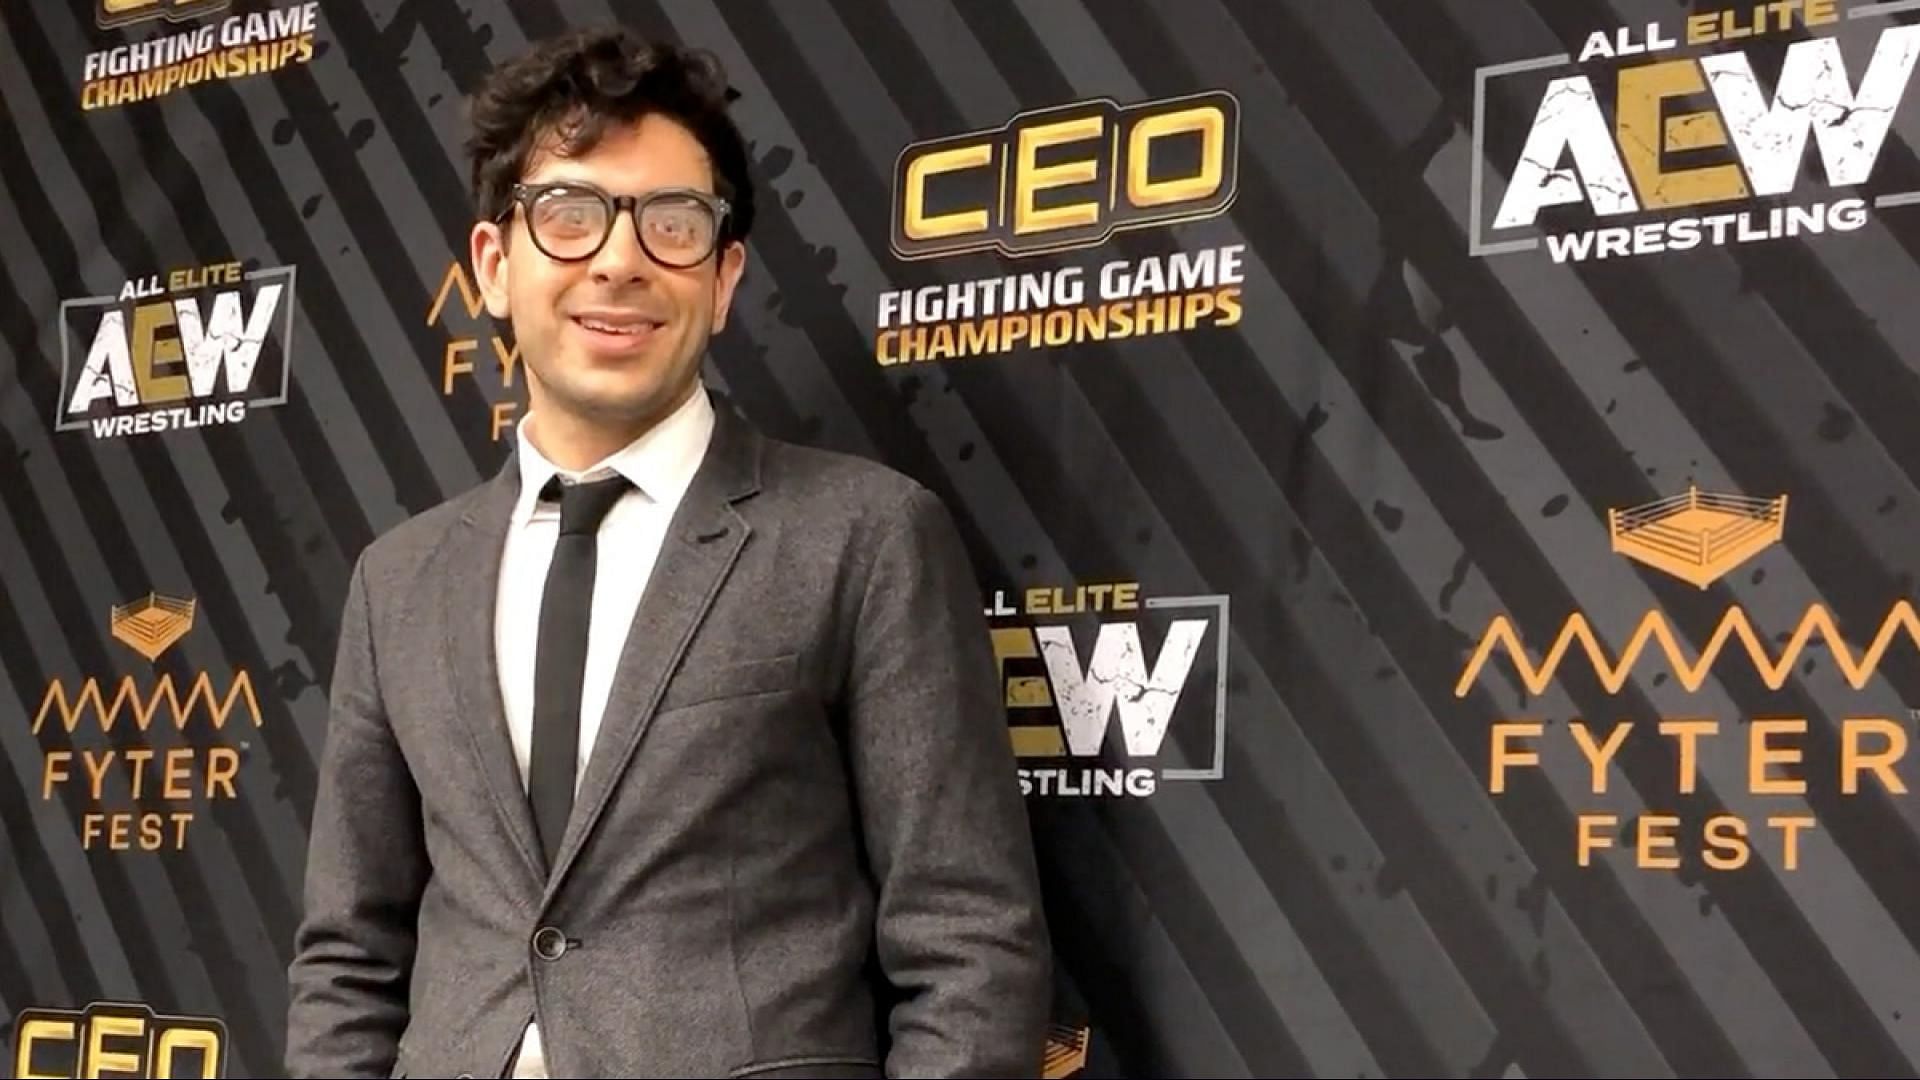 Tony Khan was recently called out for his past comments